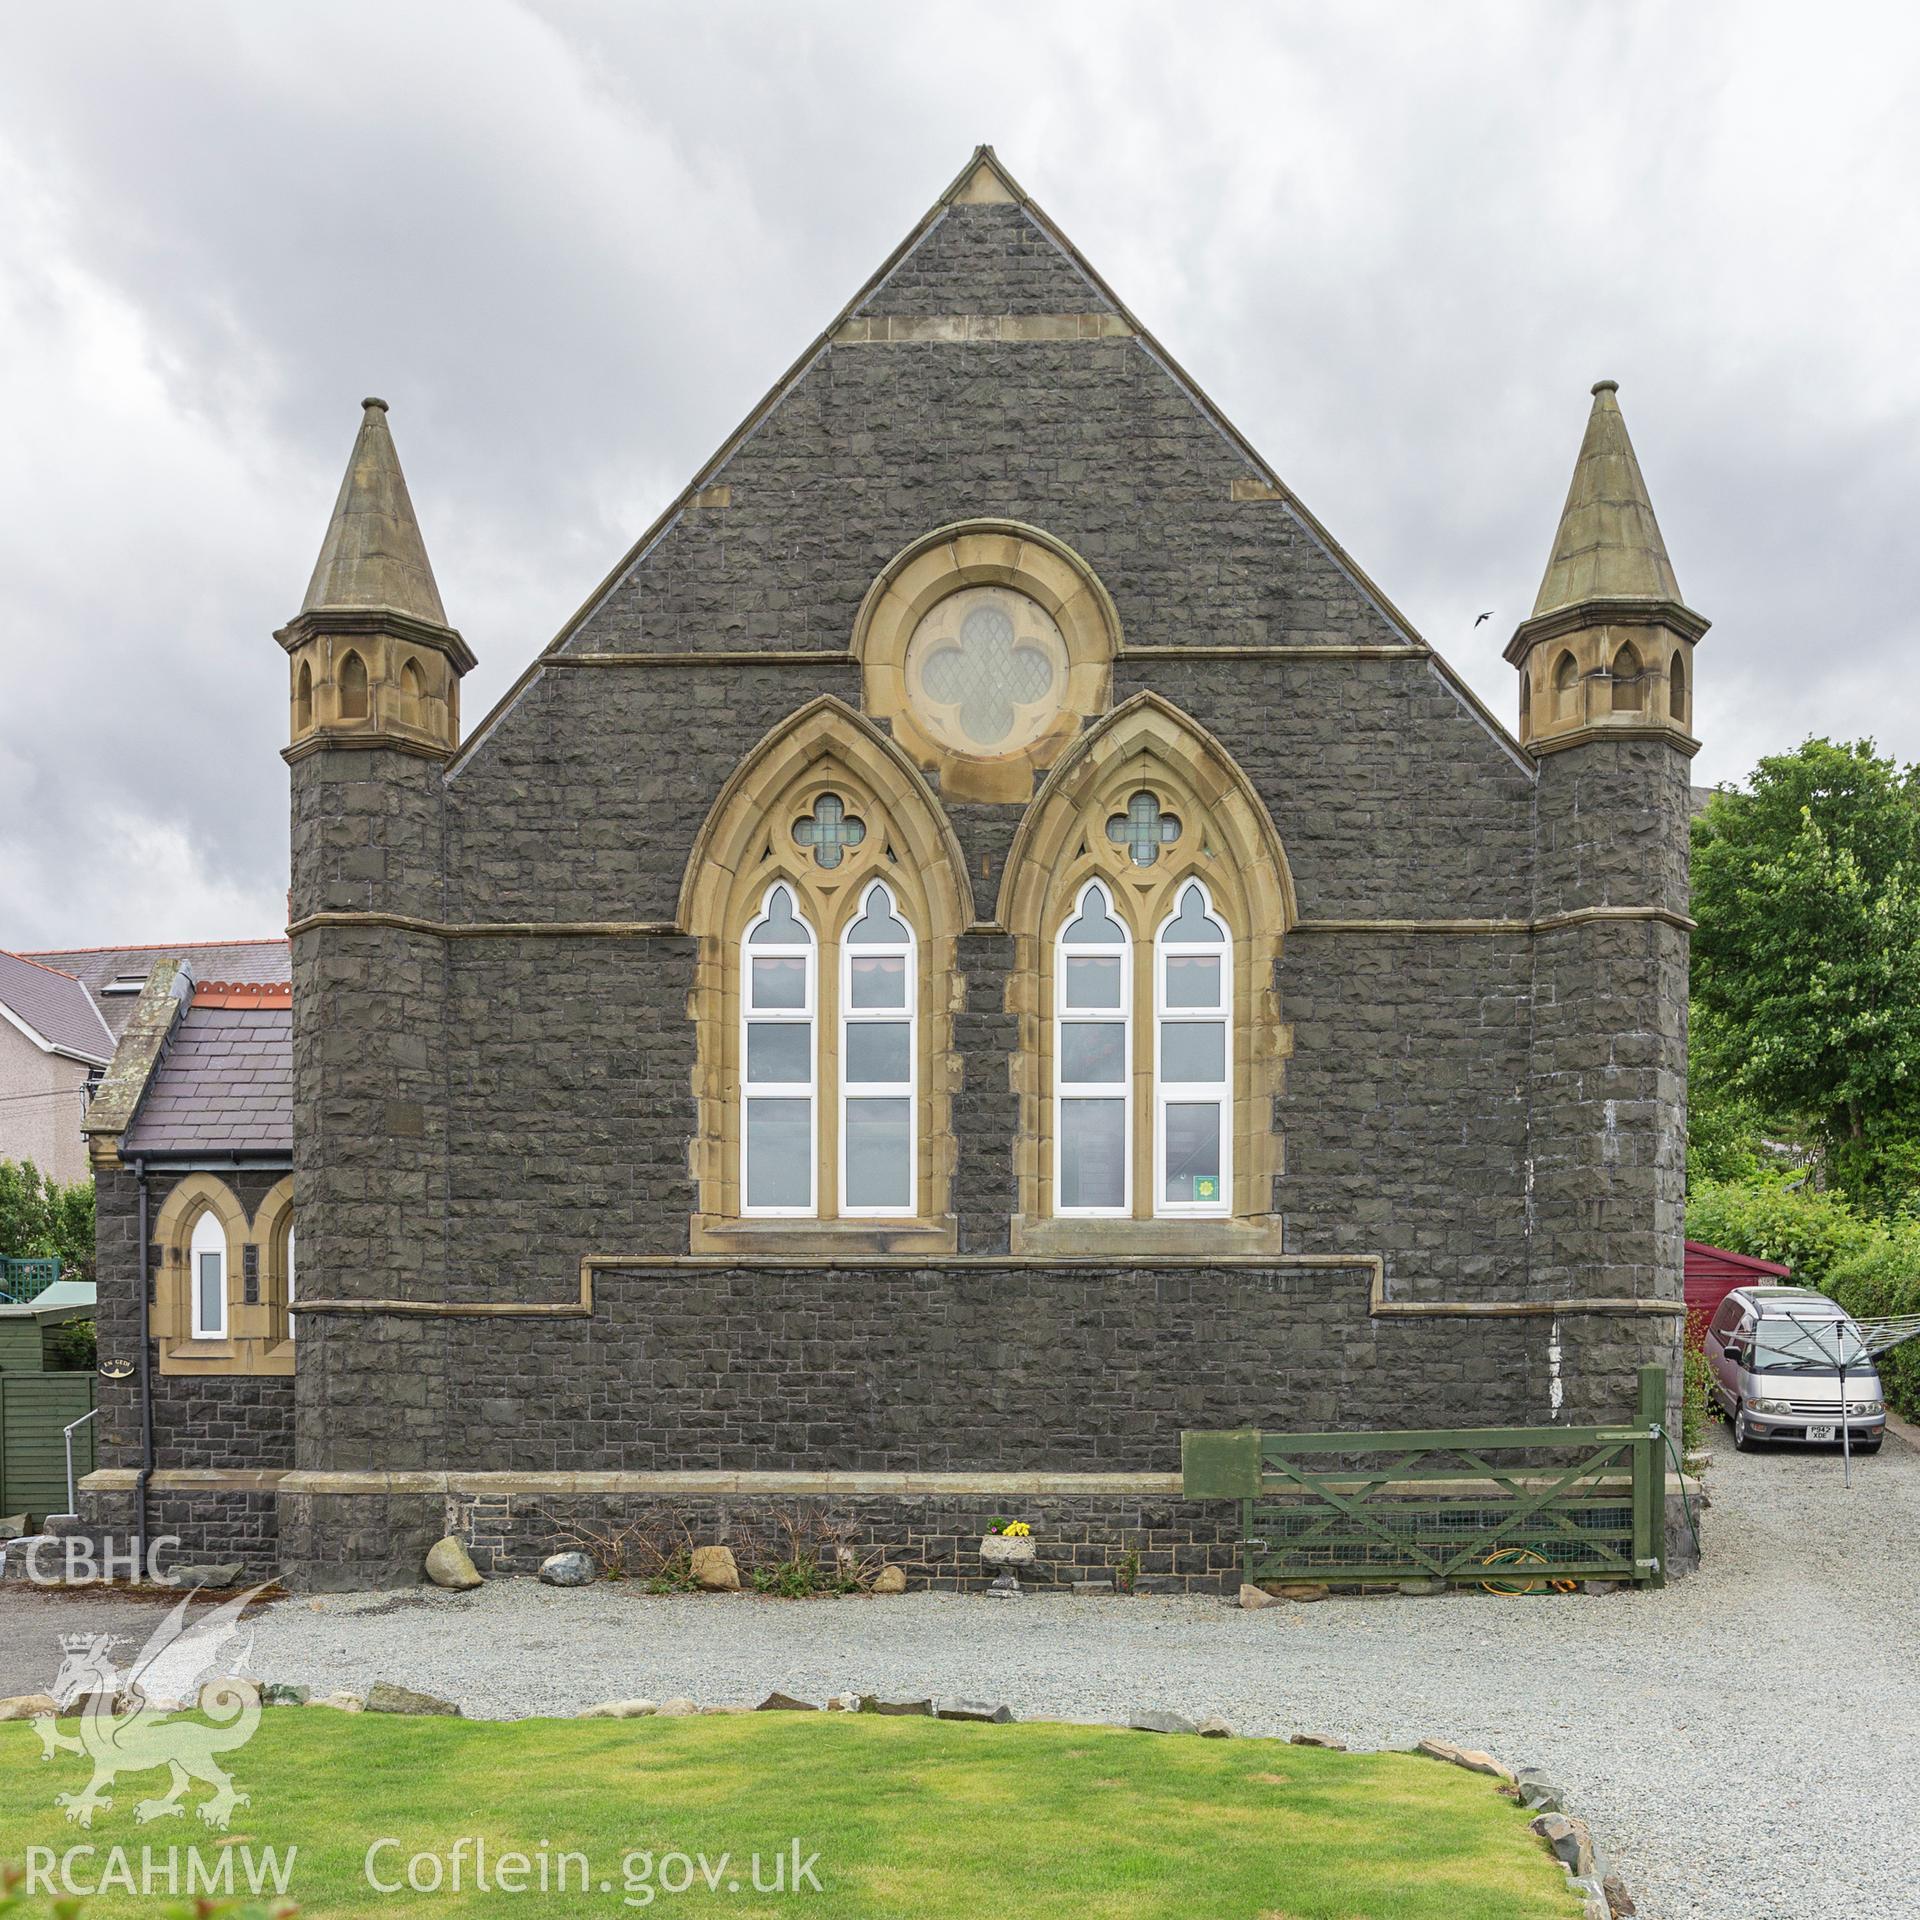 Colour photograph showing side elevation of Moriah Independent Chapel, Penmaenmawr. Photographed by Richard Barrett on 15th June 2018.